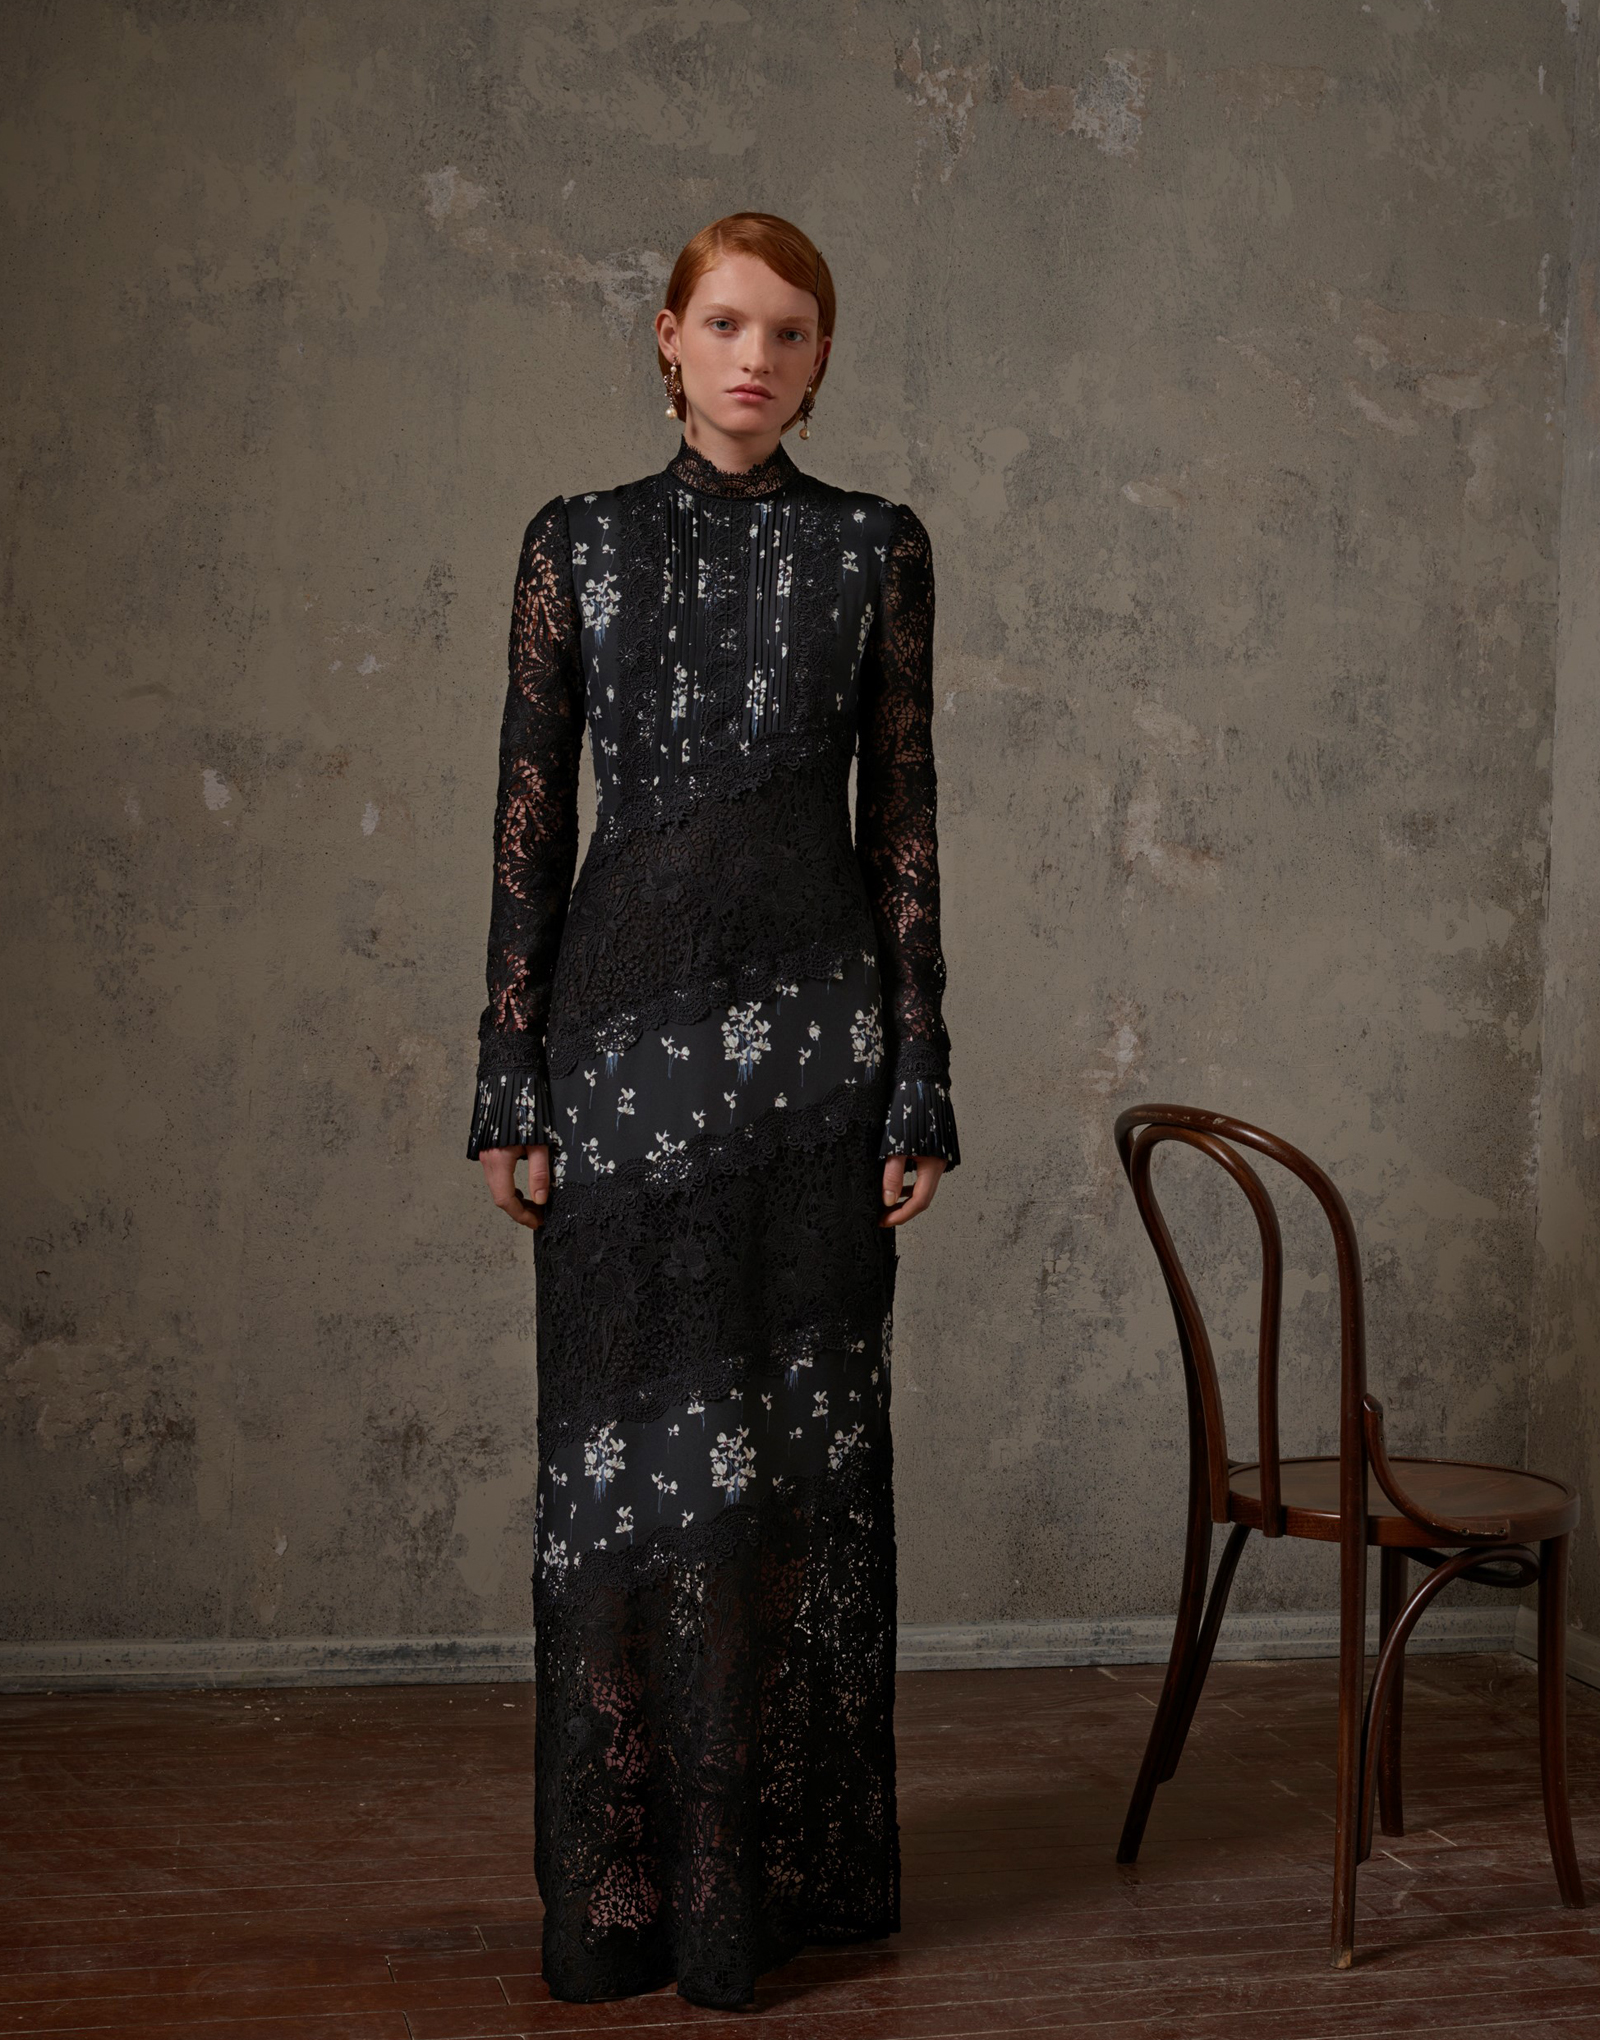 Look Book ERDEM x H&M by Photographer Michal Pudelka